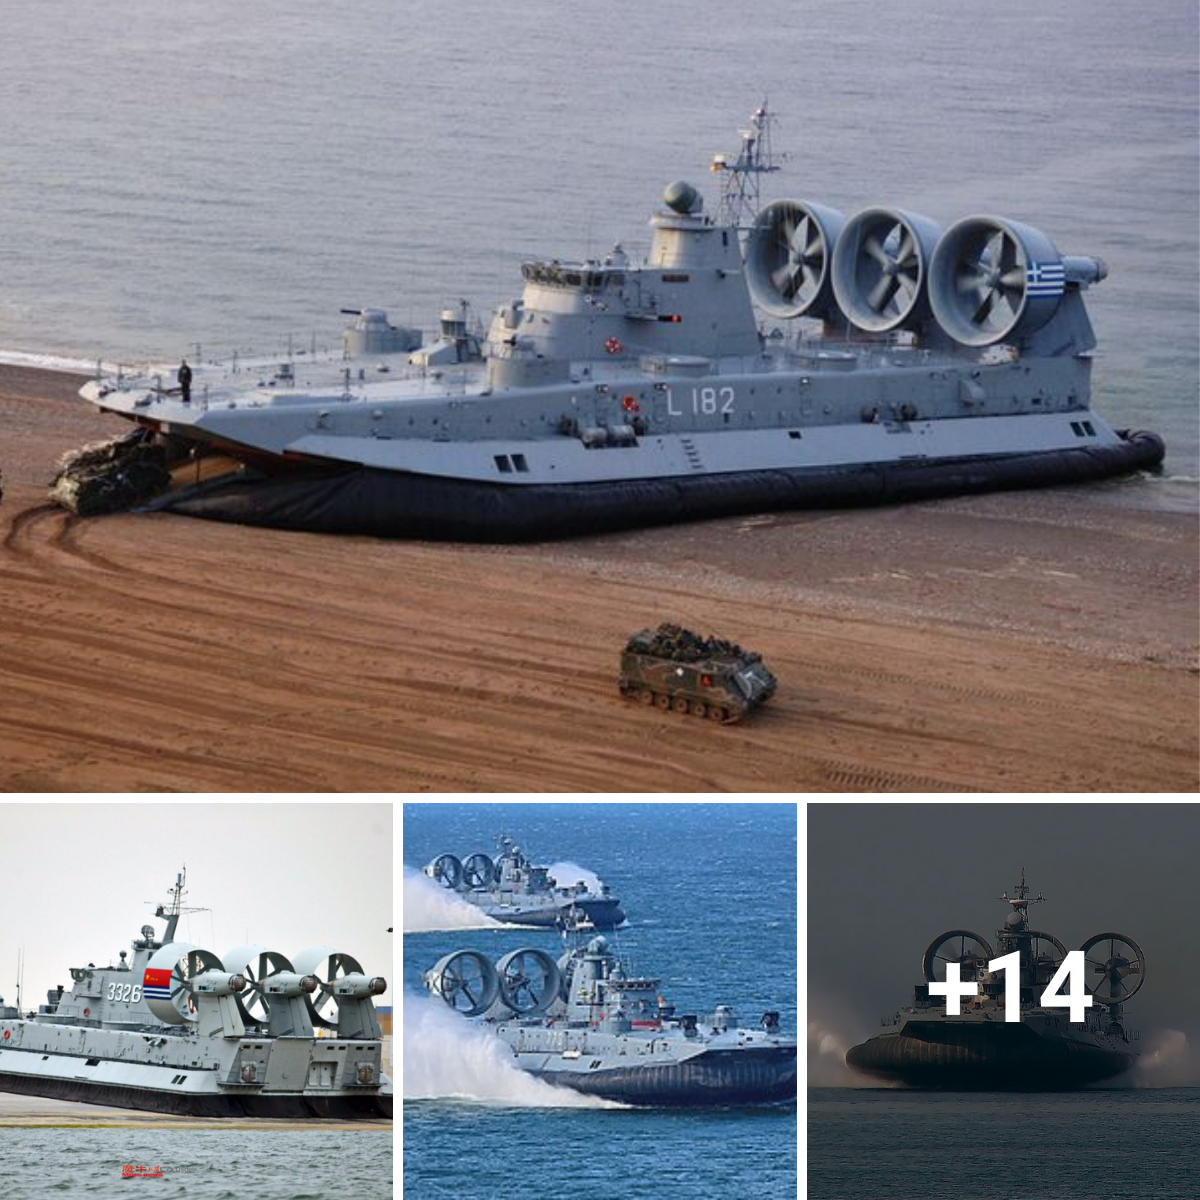 The world’s largest air cushion landing ship.